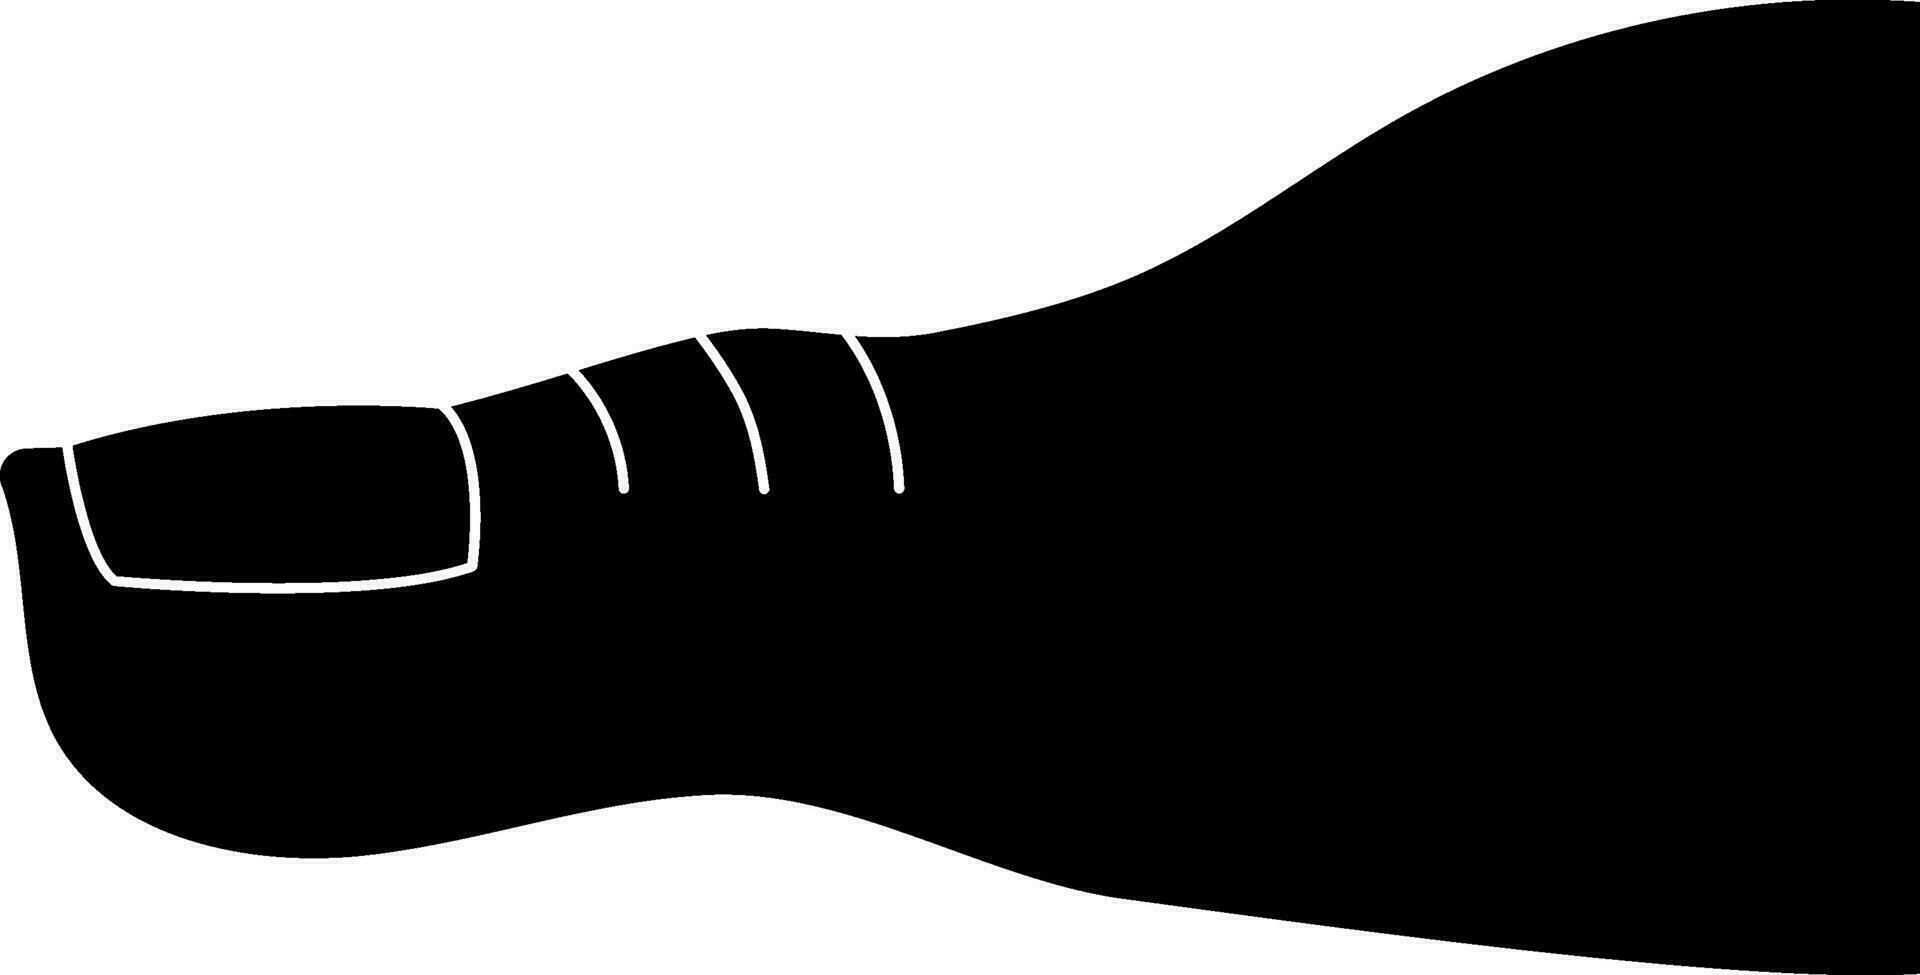 black and white thumb in flat style. vector